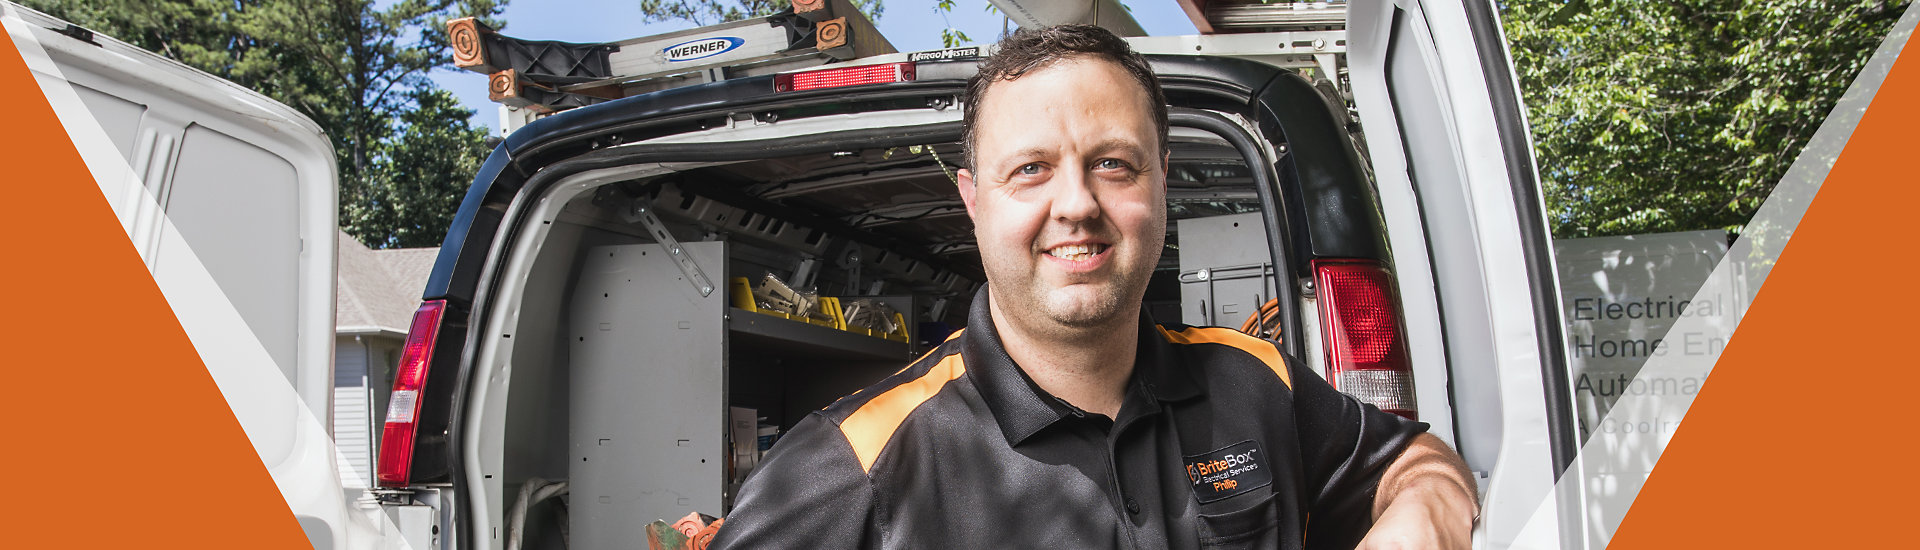 Britebox electrician smiling in front of a service van